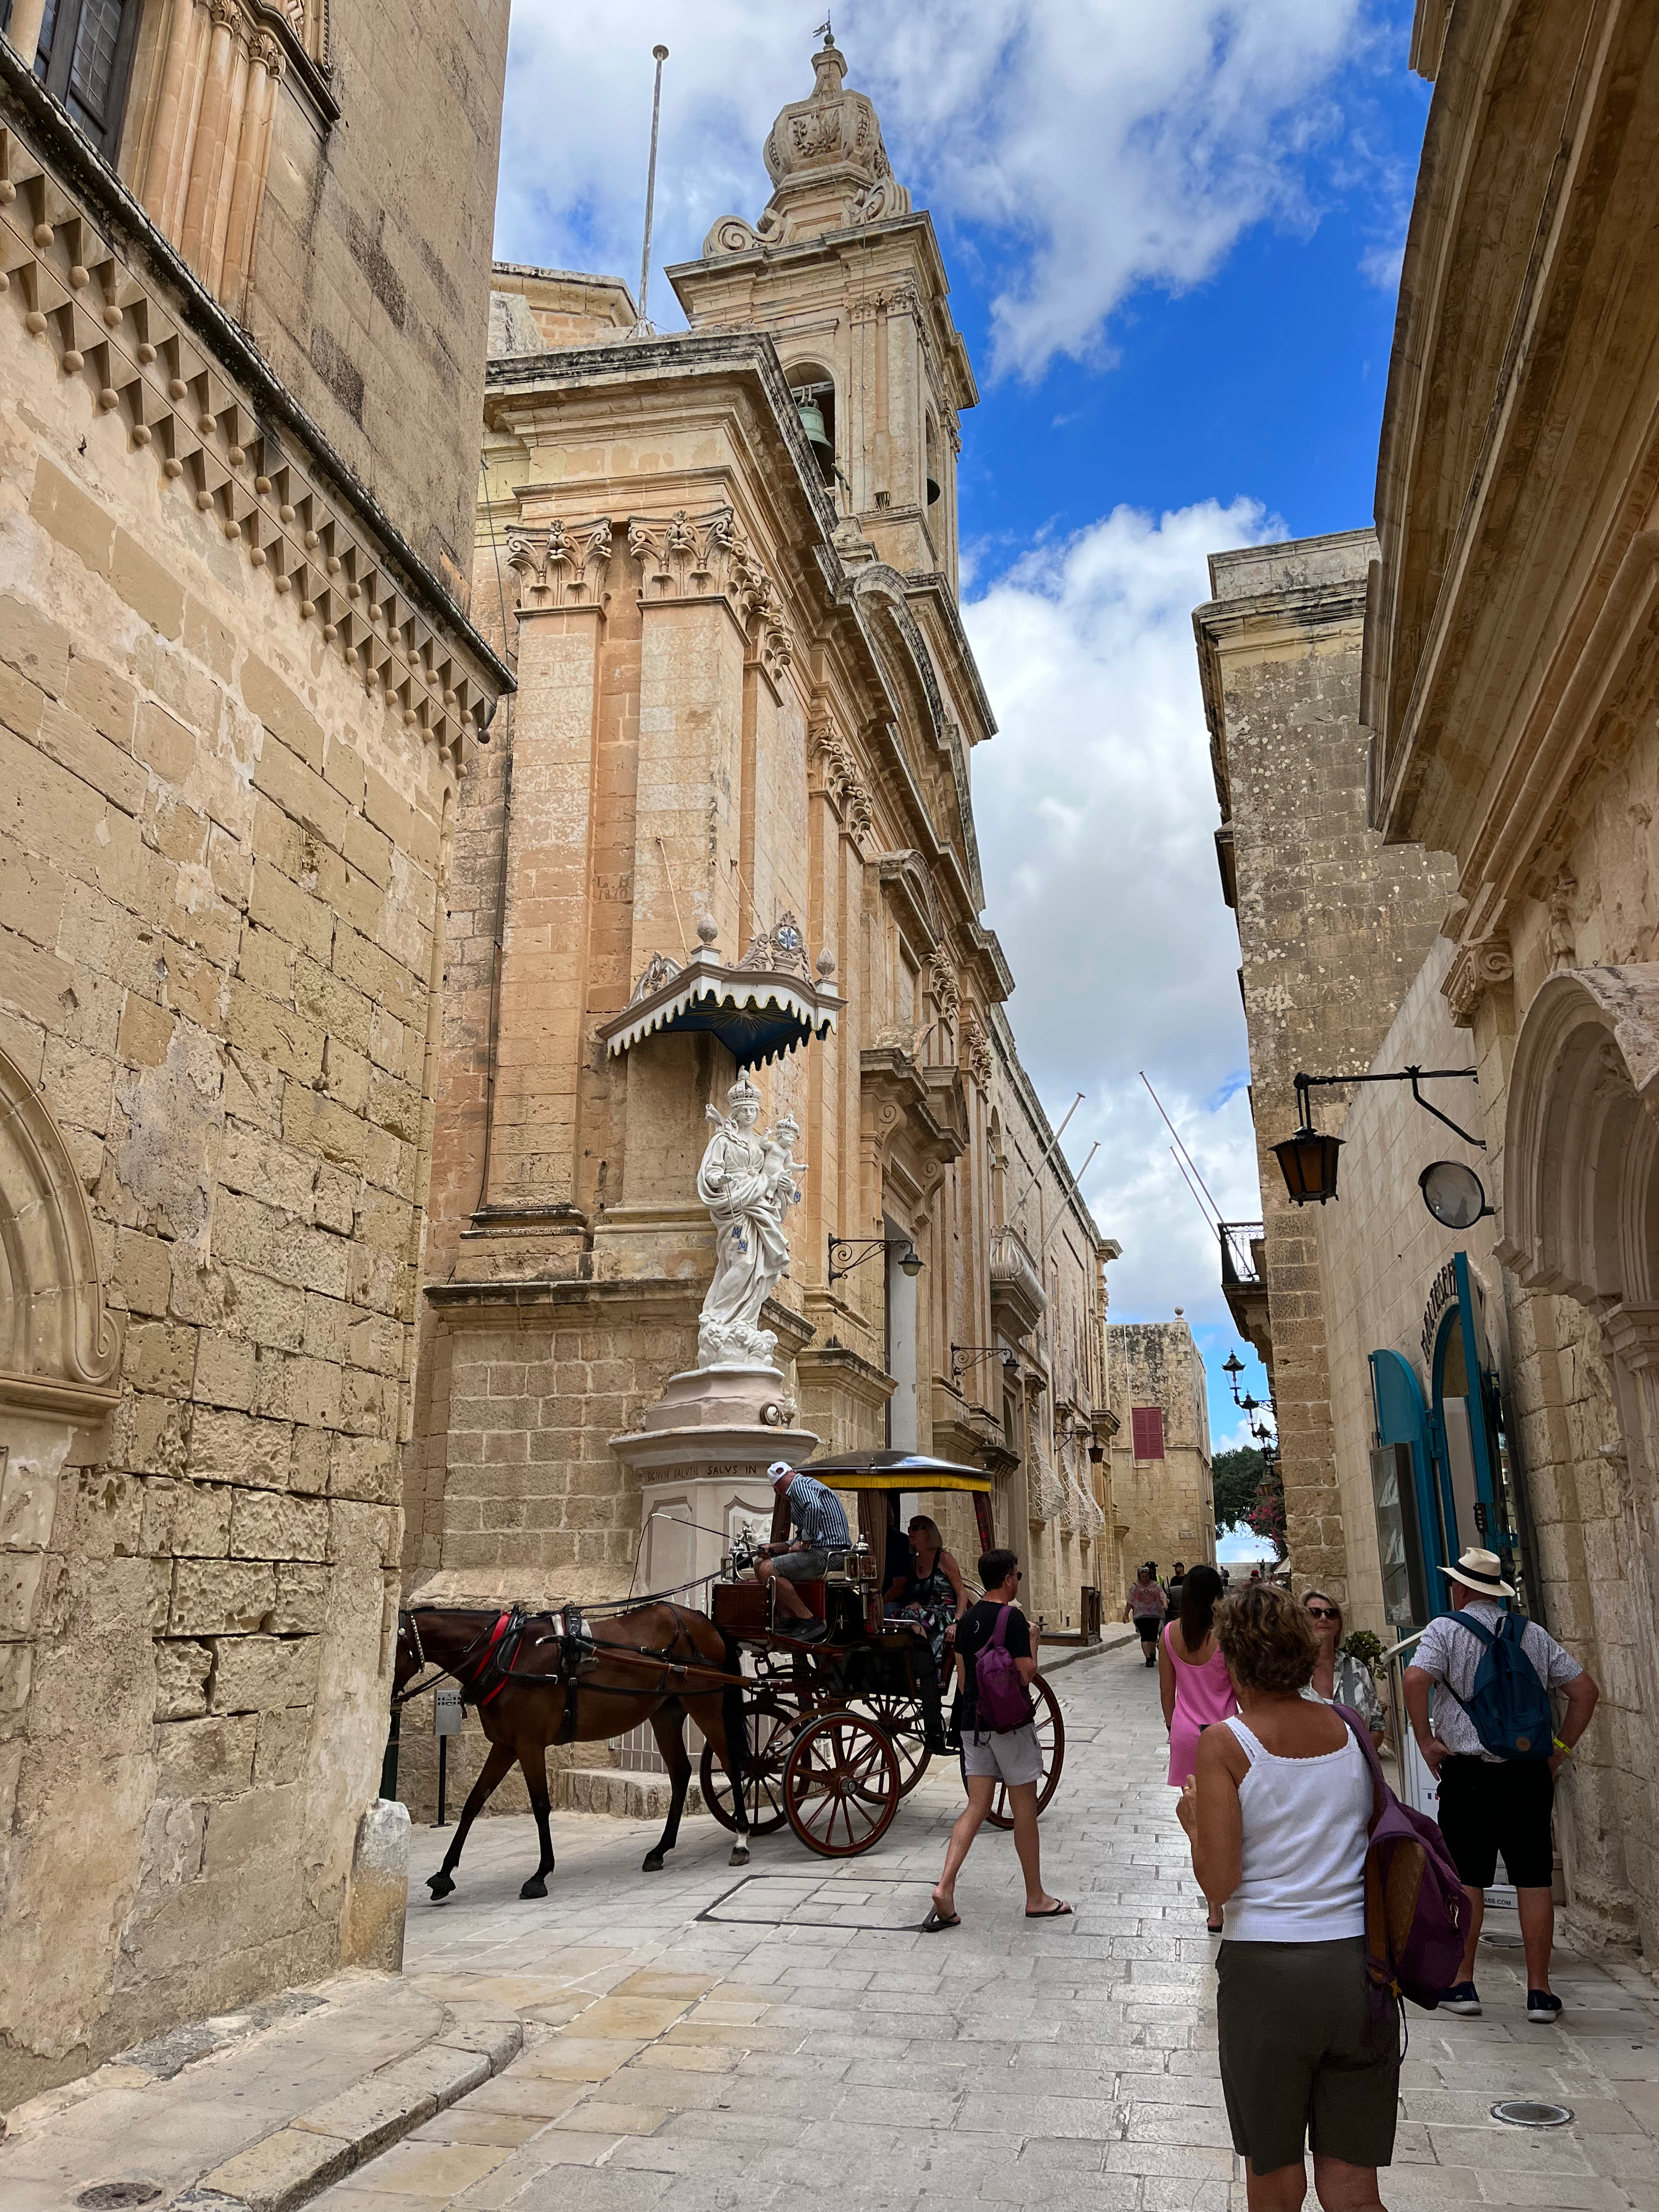 Alley in Mdina